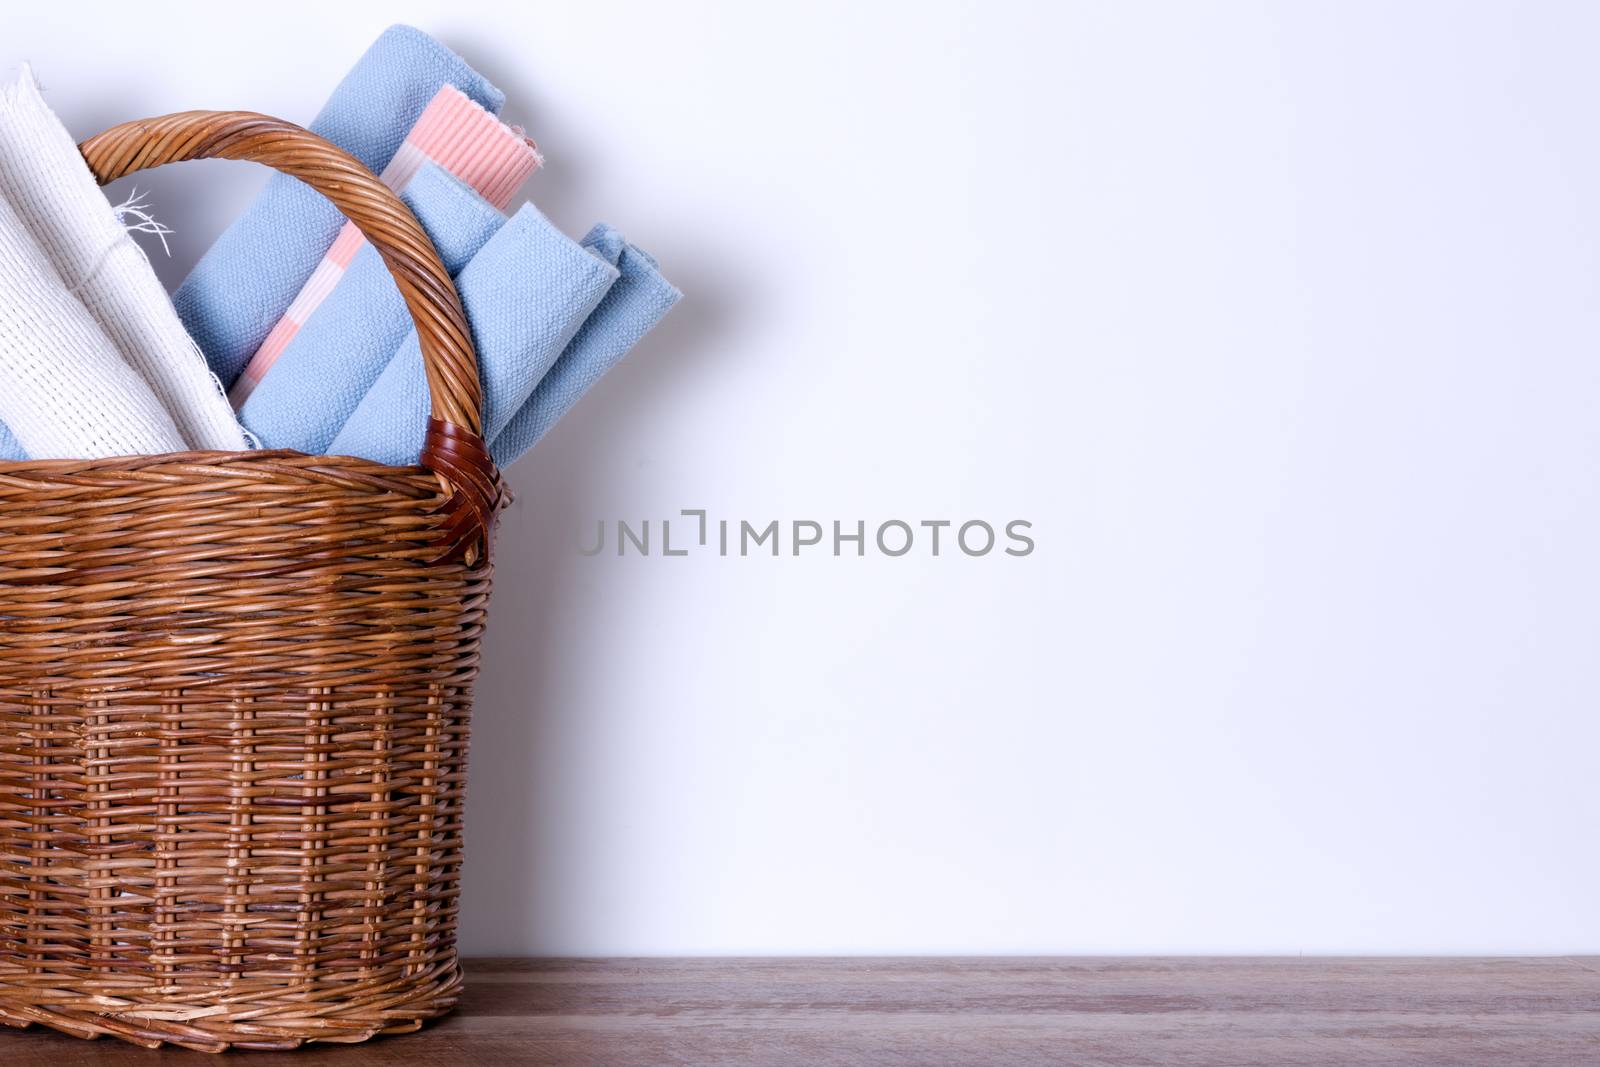 Worn Out Rugs in a Basket Against Empty White Wall by coskun